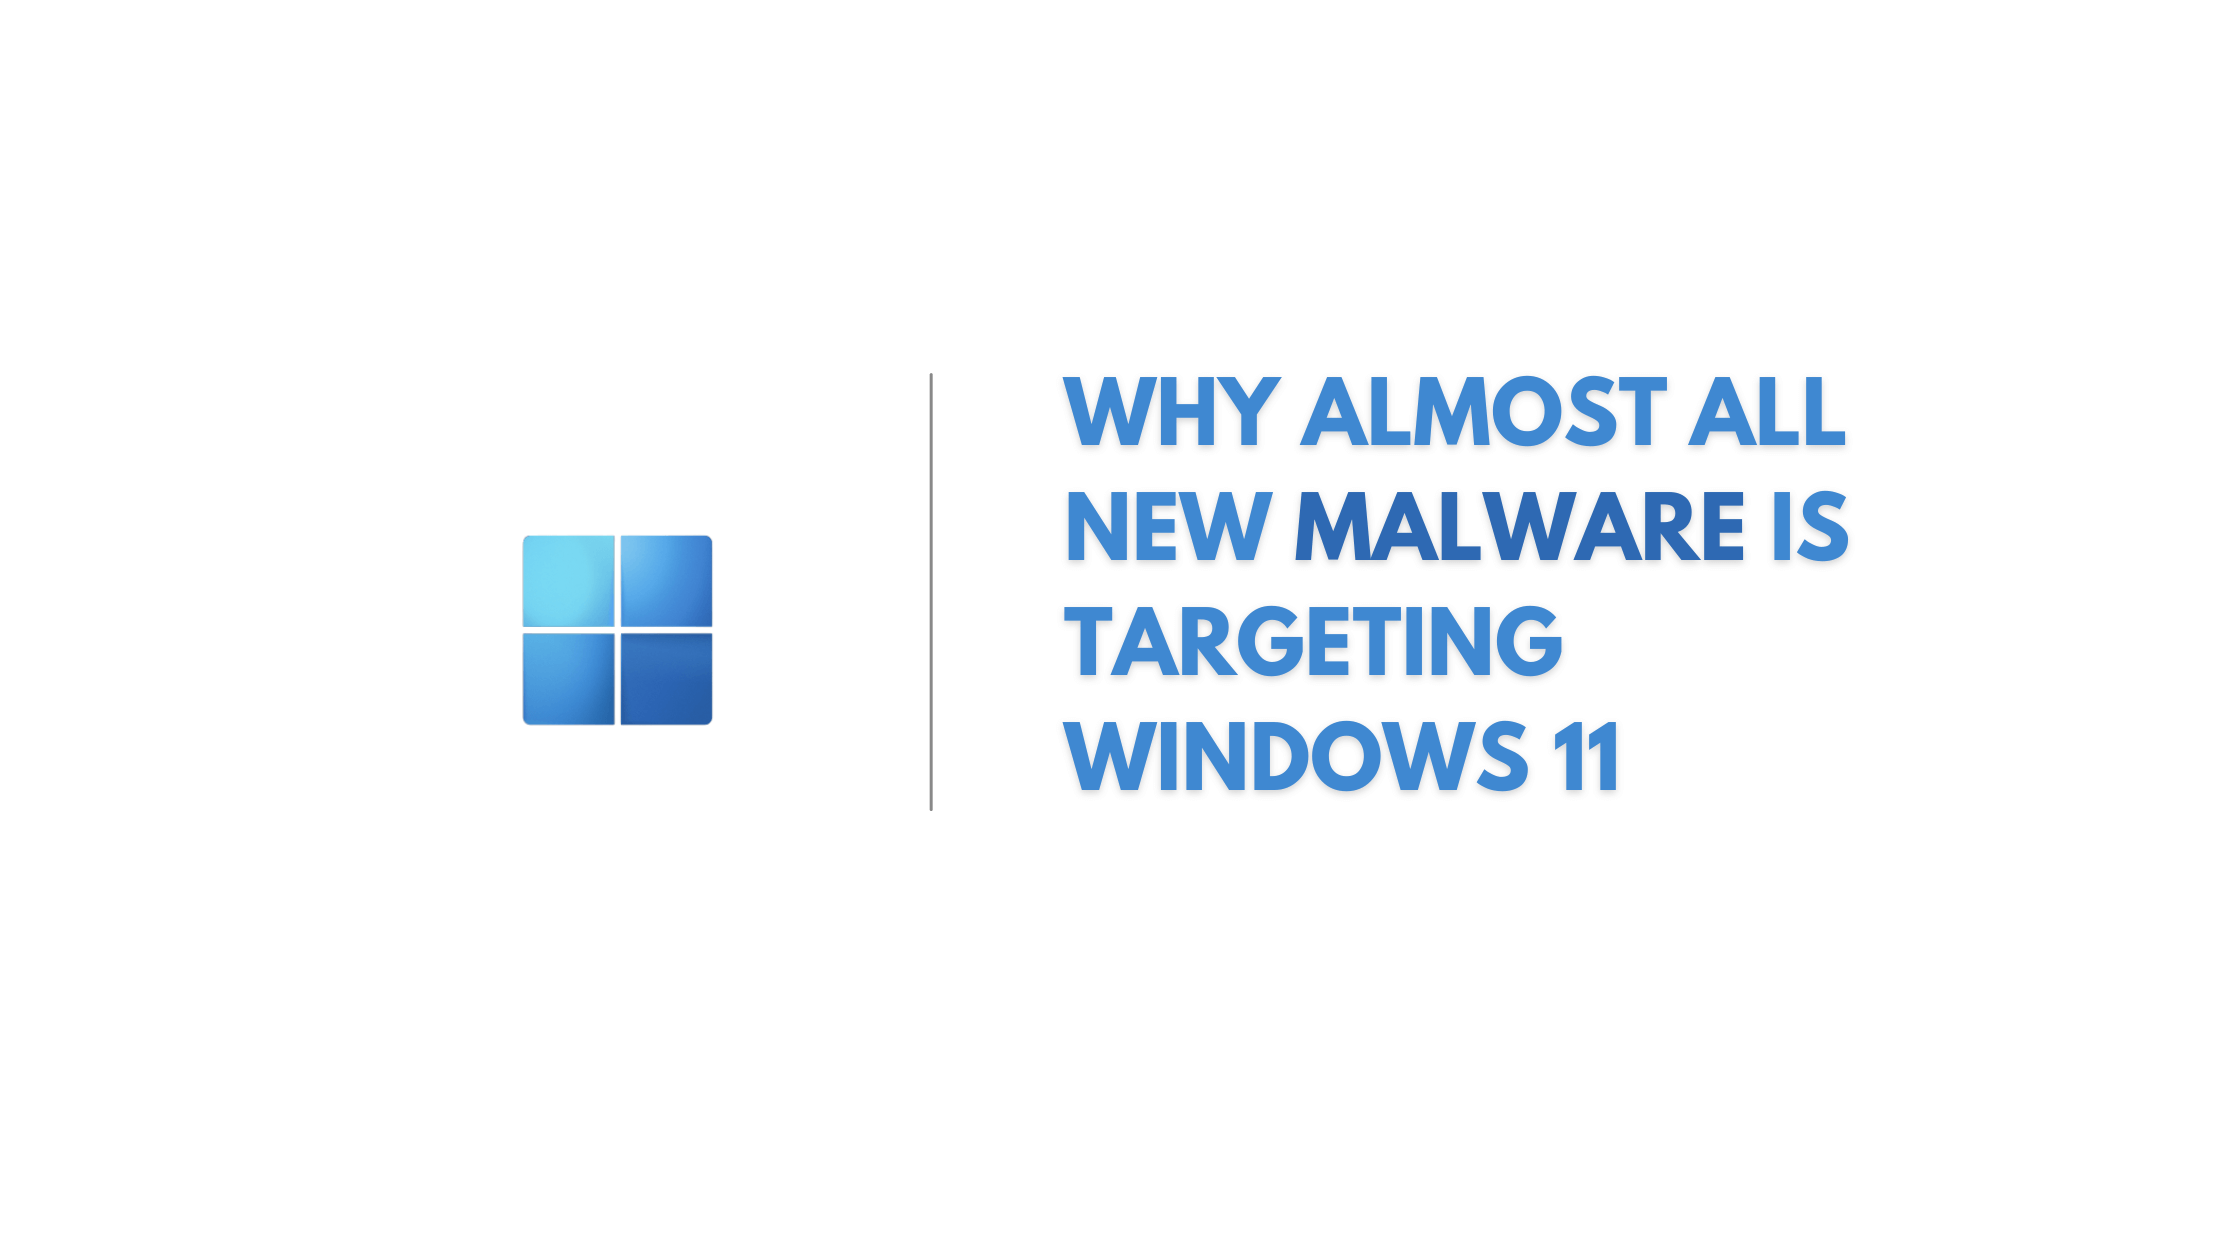 Why Almost All New Malware Is Targeting Windows 11 (1)